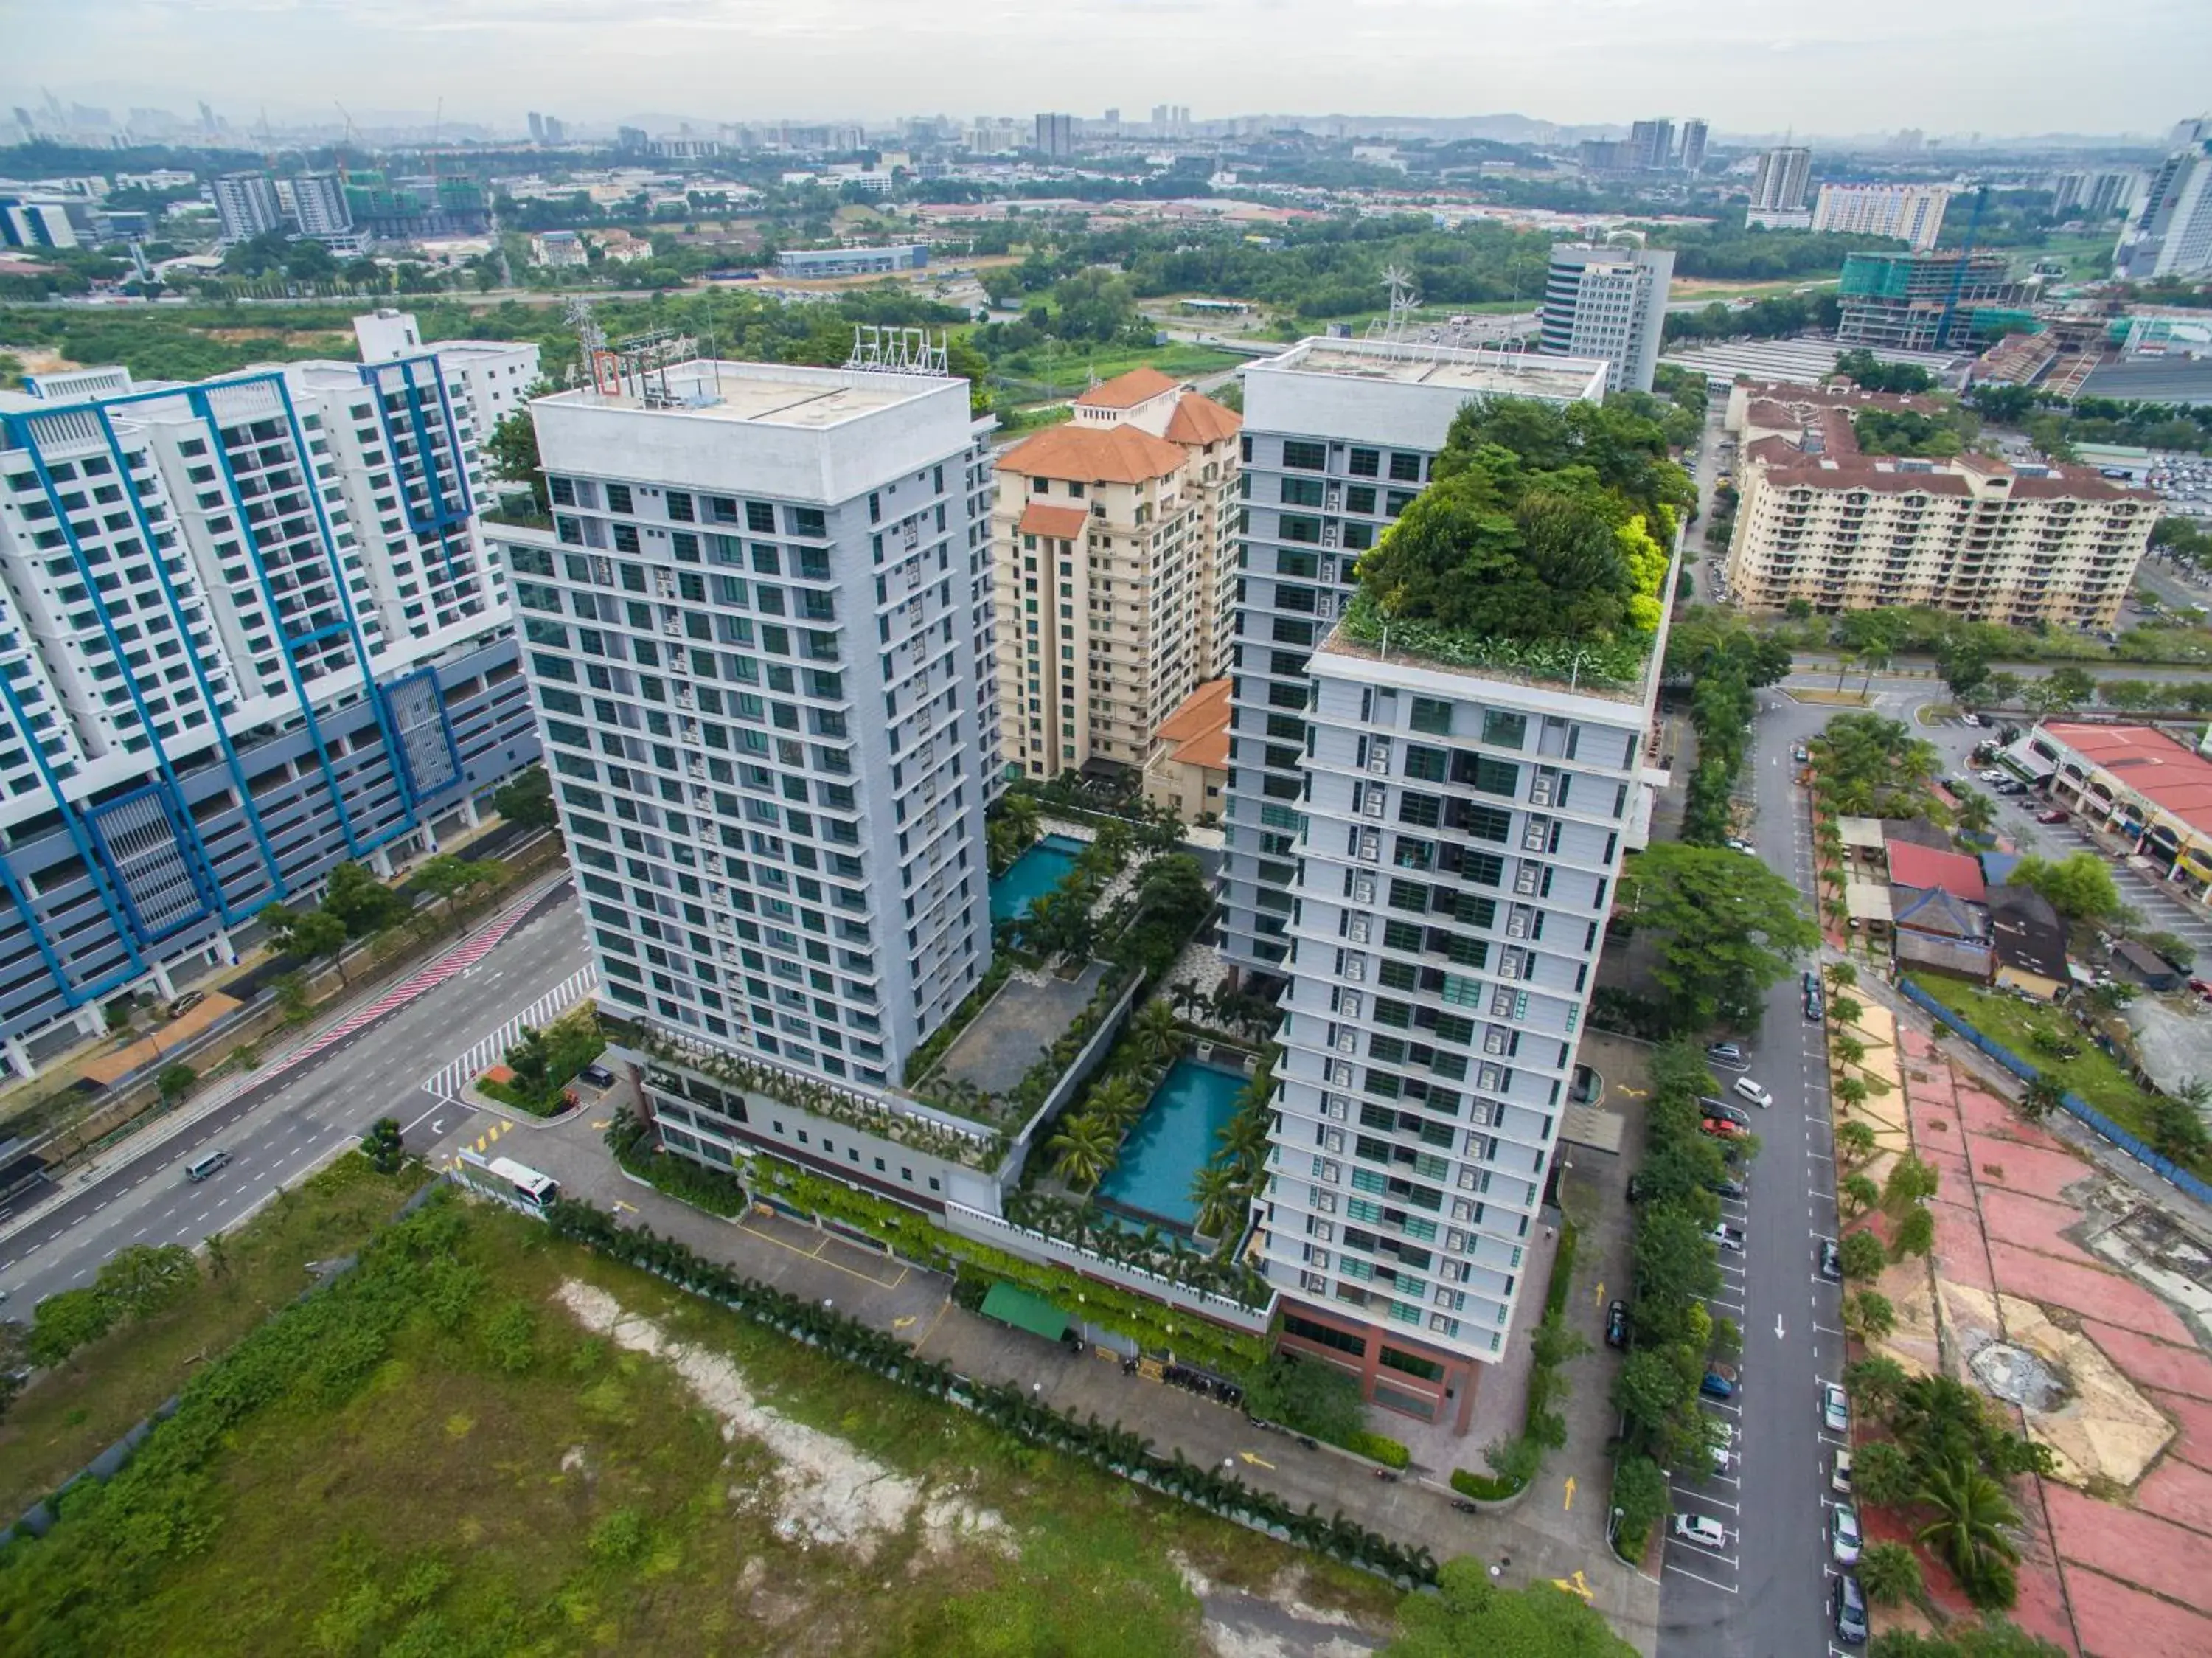 Property building, Bird's-eye View in Acappella Suite Hotel, Shah Alam